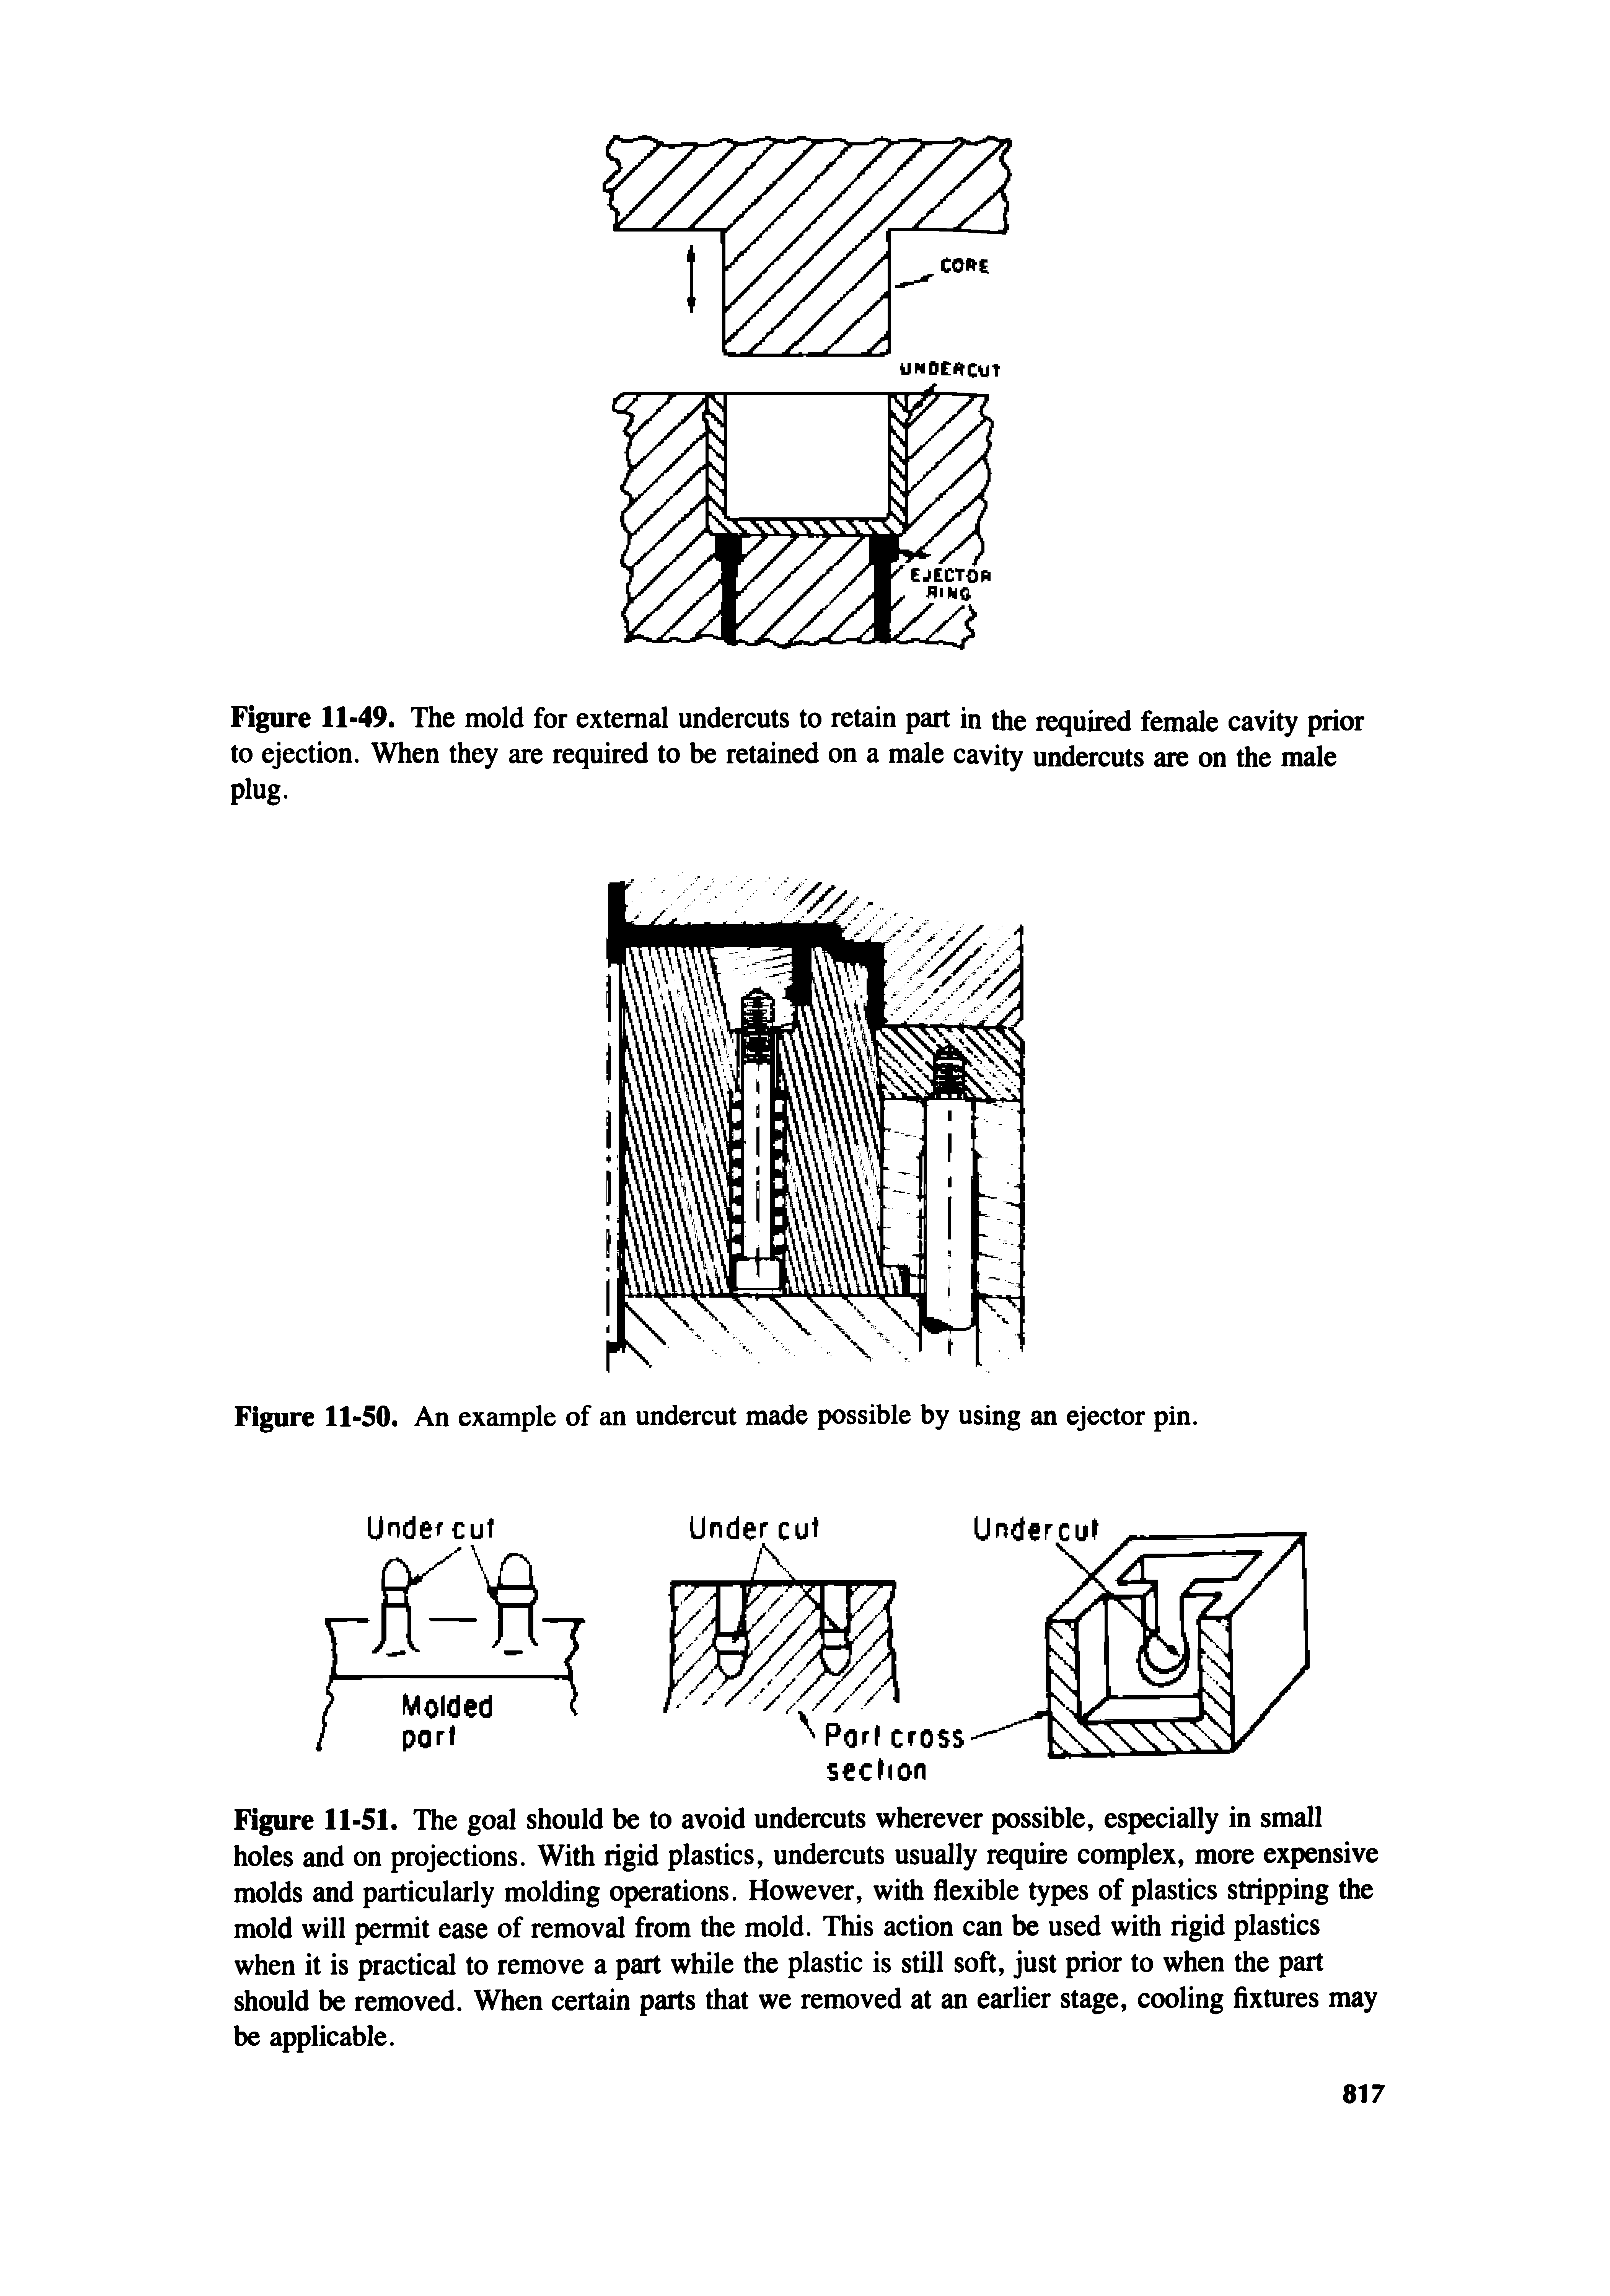 Figure 11-51. The goal should be to avoid undercuts wherever possible, especially in small holes and on projections. With rigid plastics, undercuts usually require complex, more expensive molds and particularly molding operations. However, with flexible types of plastics stripping the mold will permit ease of removal from the mold. This action can be used with rigid plastics when it is practical to remove a part while the plastic is still soft, just prior to when the part should be removed. When certain parts that we removed at an earlier stage, cooling fixtures may be applicable.